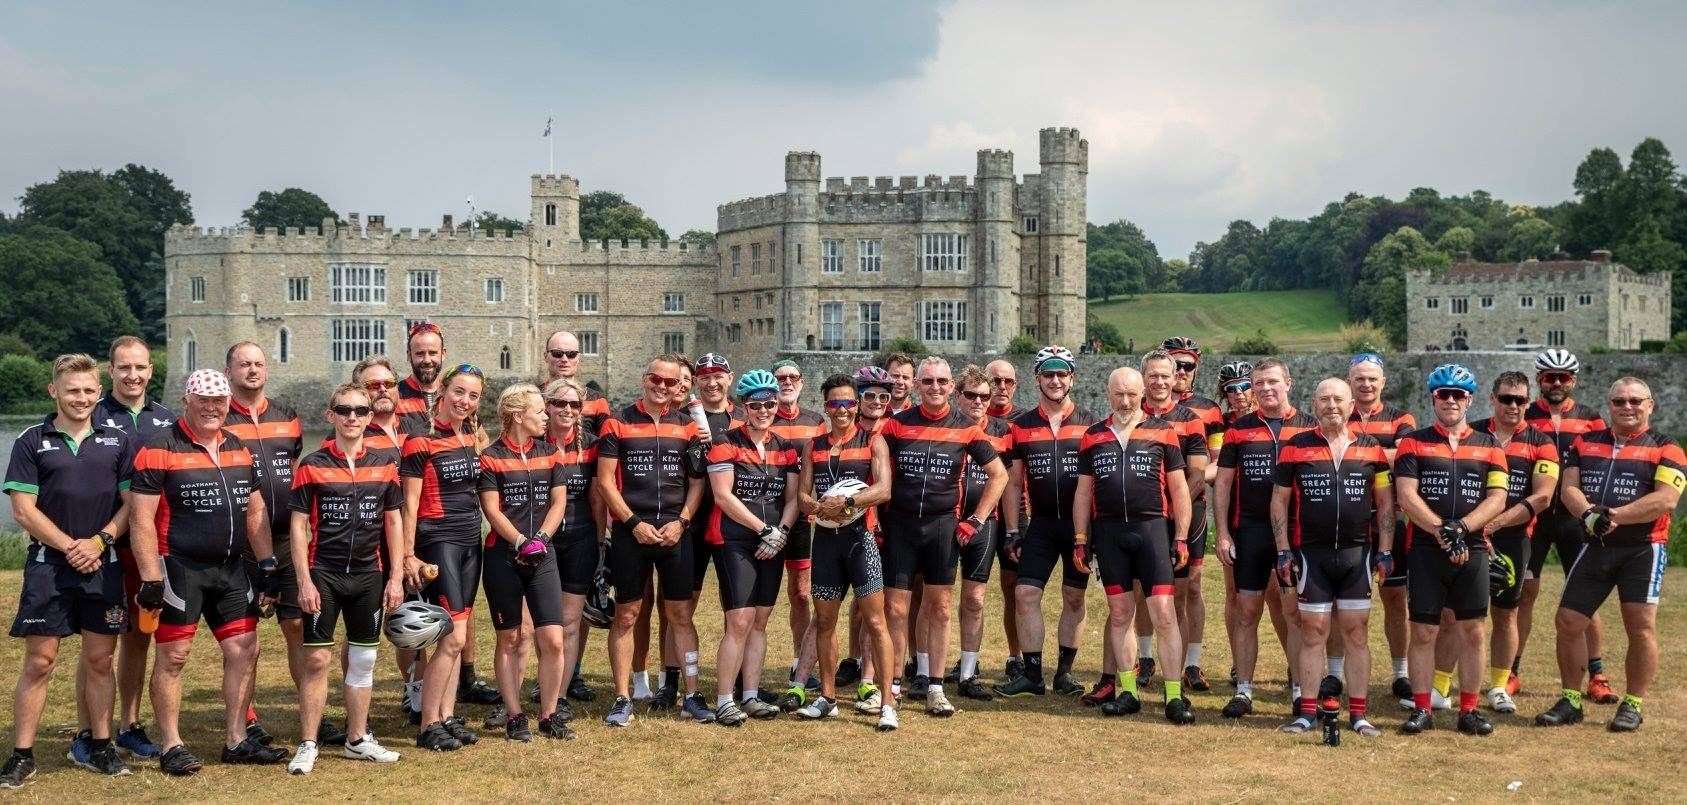 The Goatham’s Great Kent Cycle Ride outside Leeds Castle. This year, it will take place from Friday, July 3 to Sunday, July 5.